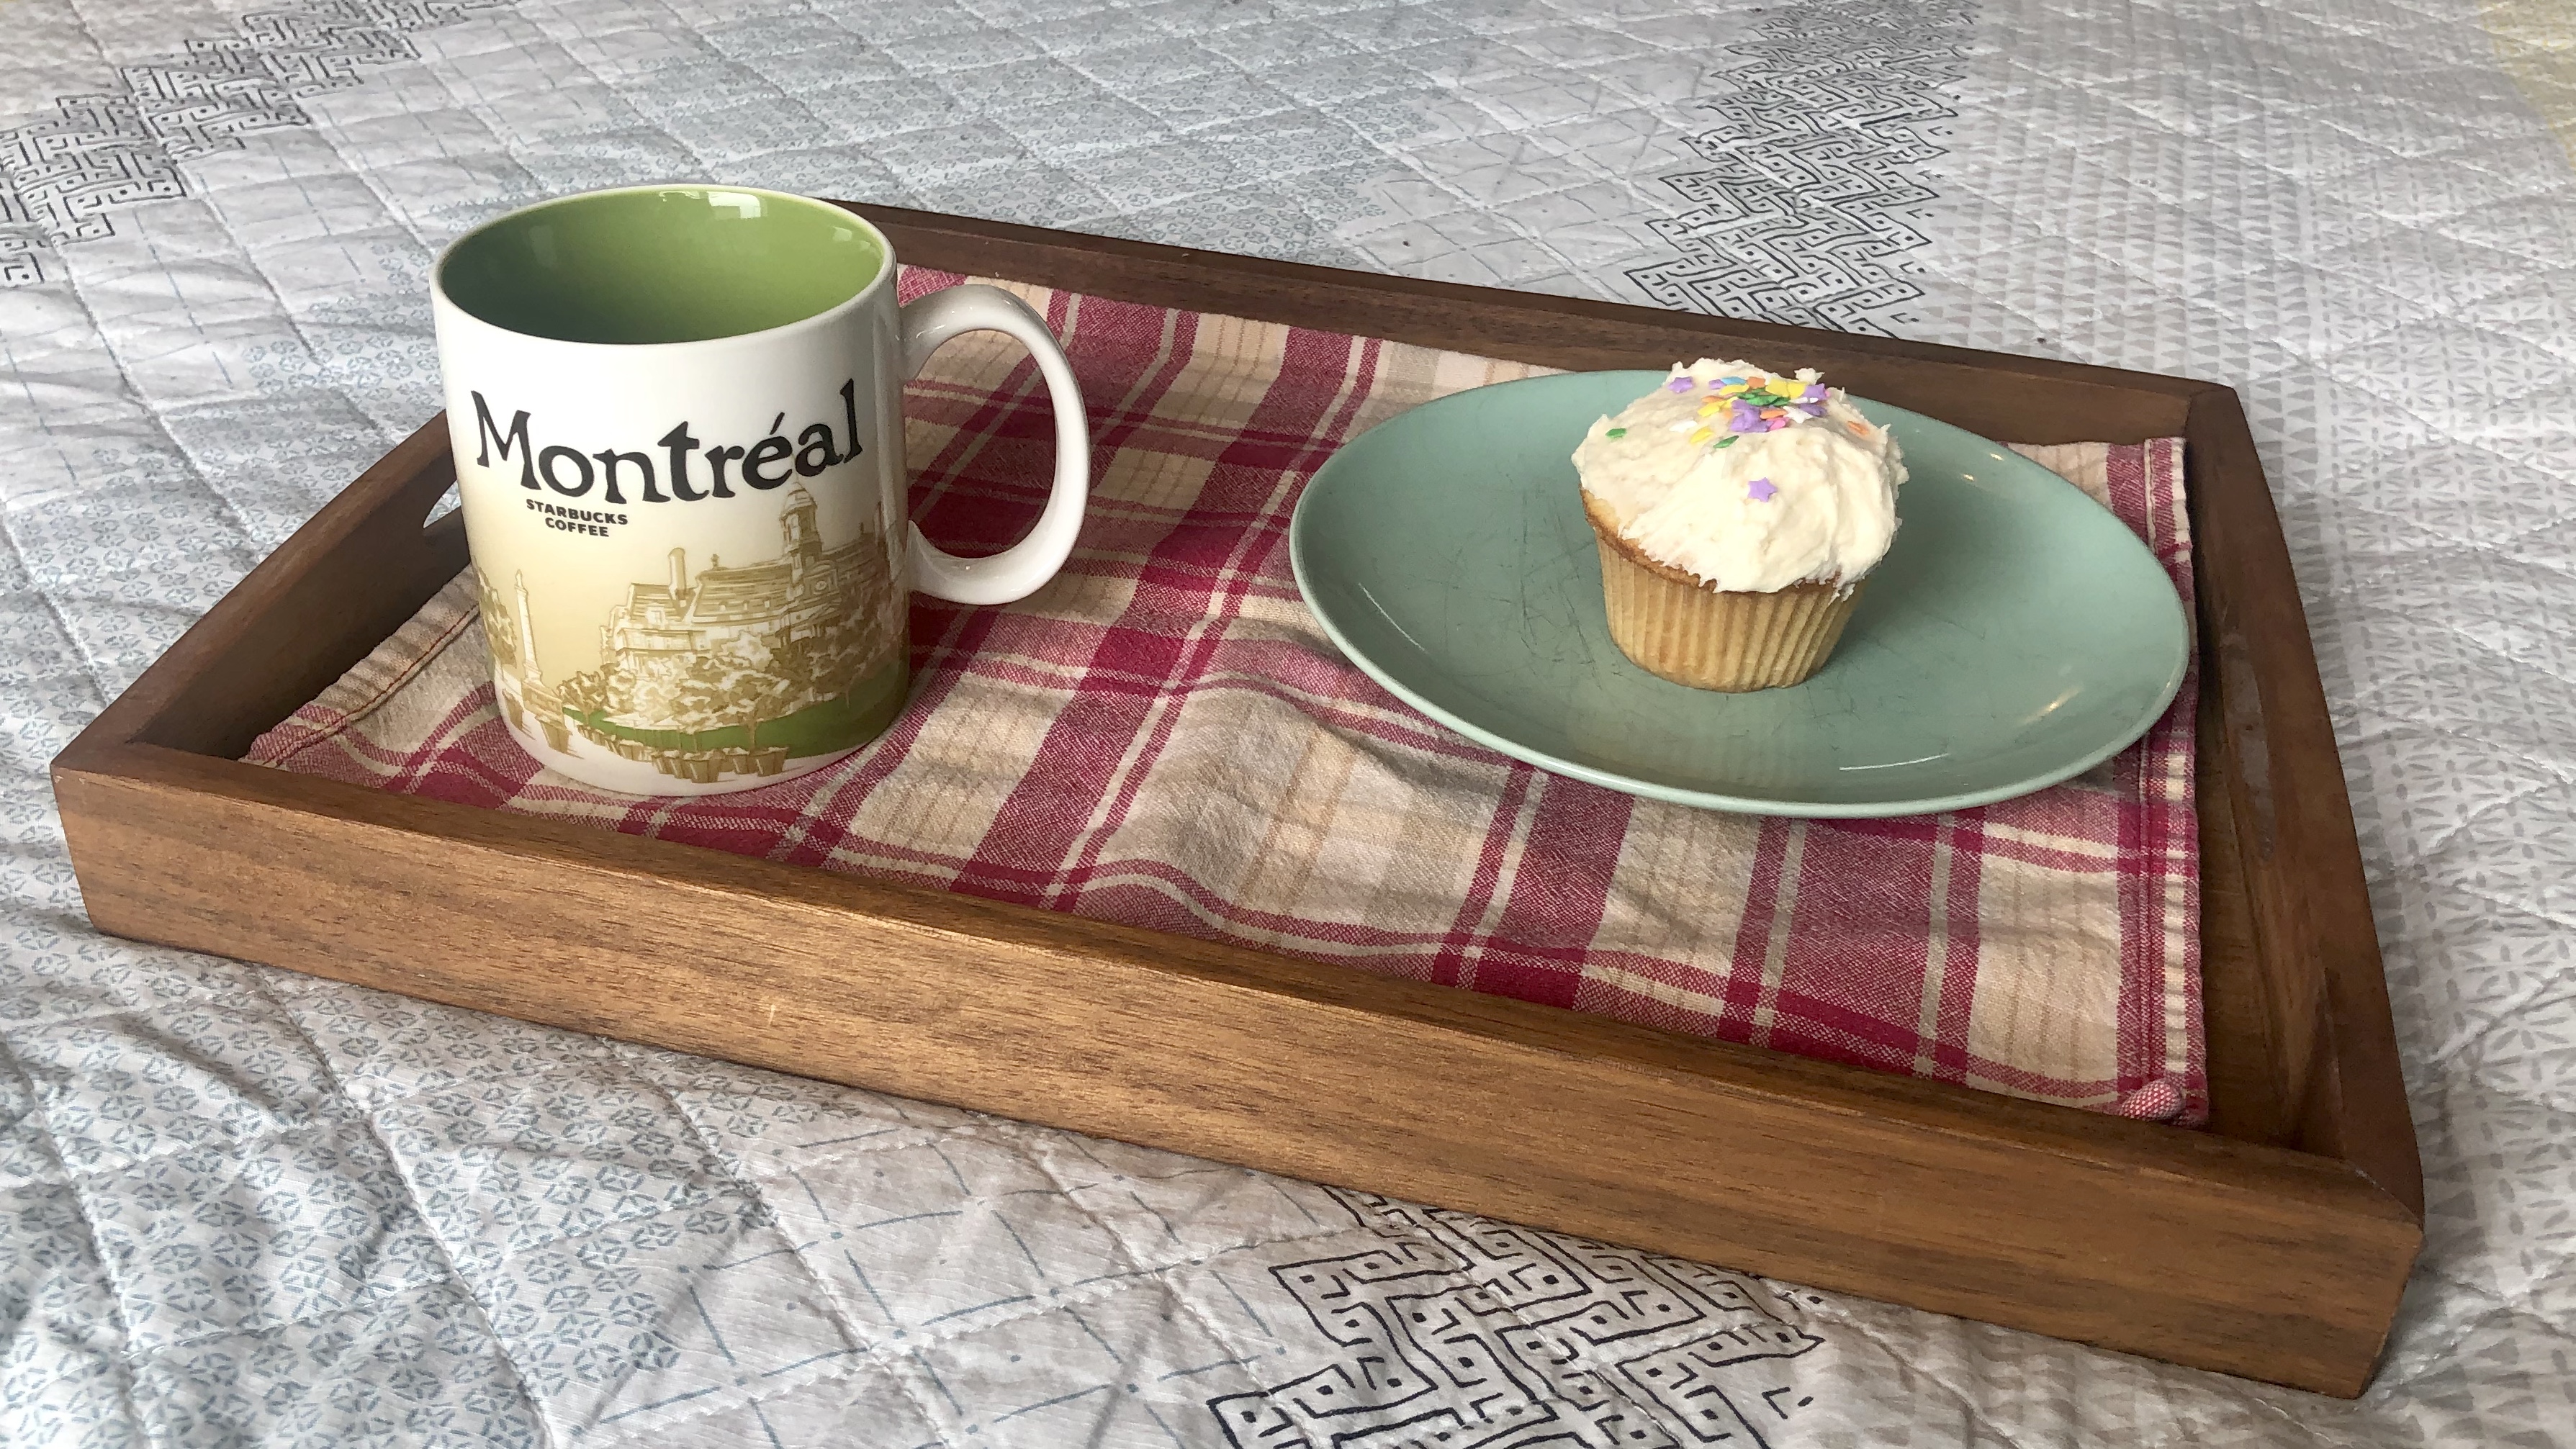 A small wooden lap tray with a mug on it, and a plate with a cup cake. The mug reads &ldquo;Montreal&rdquo; and the tray has a red patterned tea-towel underneath the mug and plate.